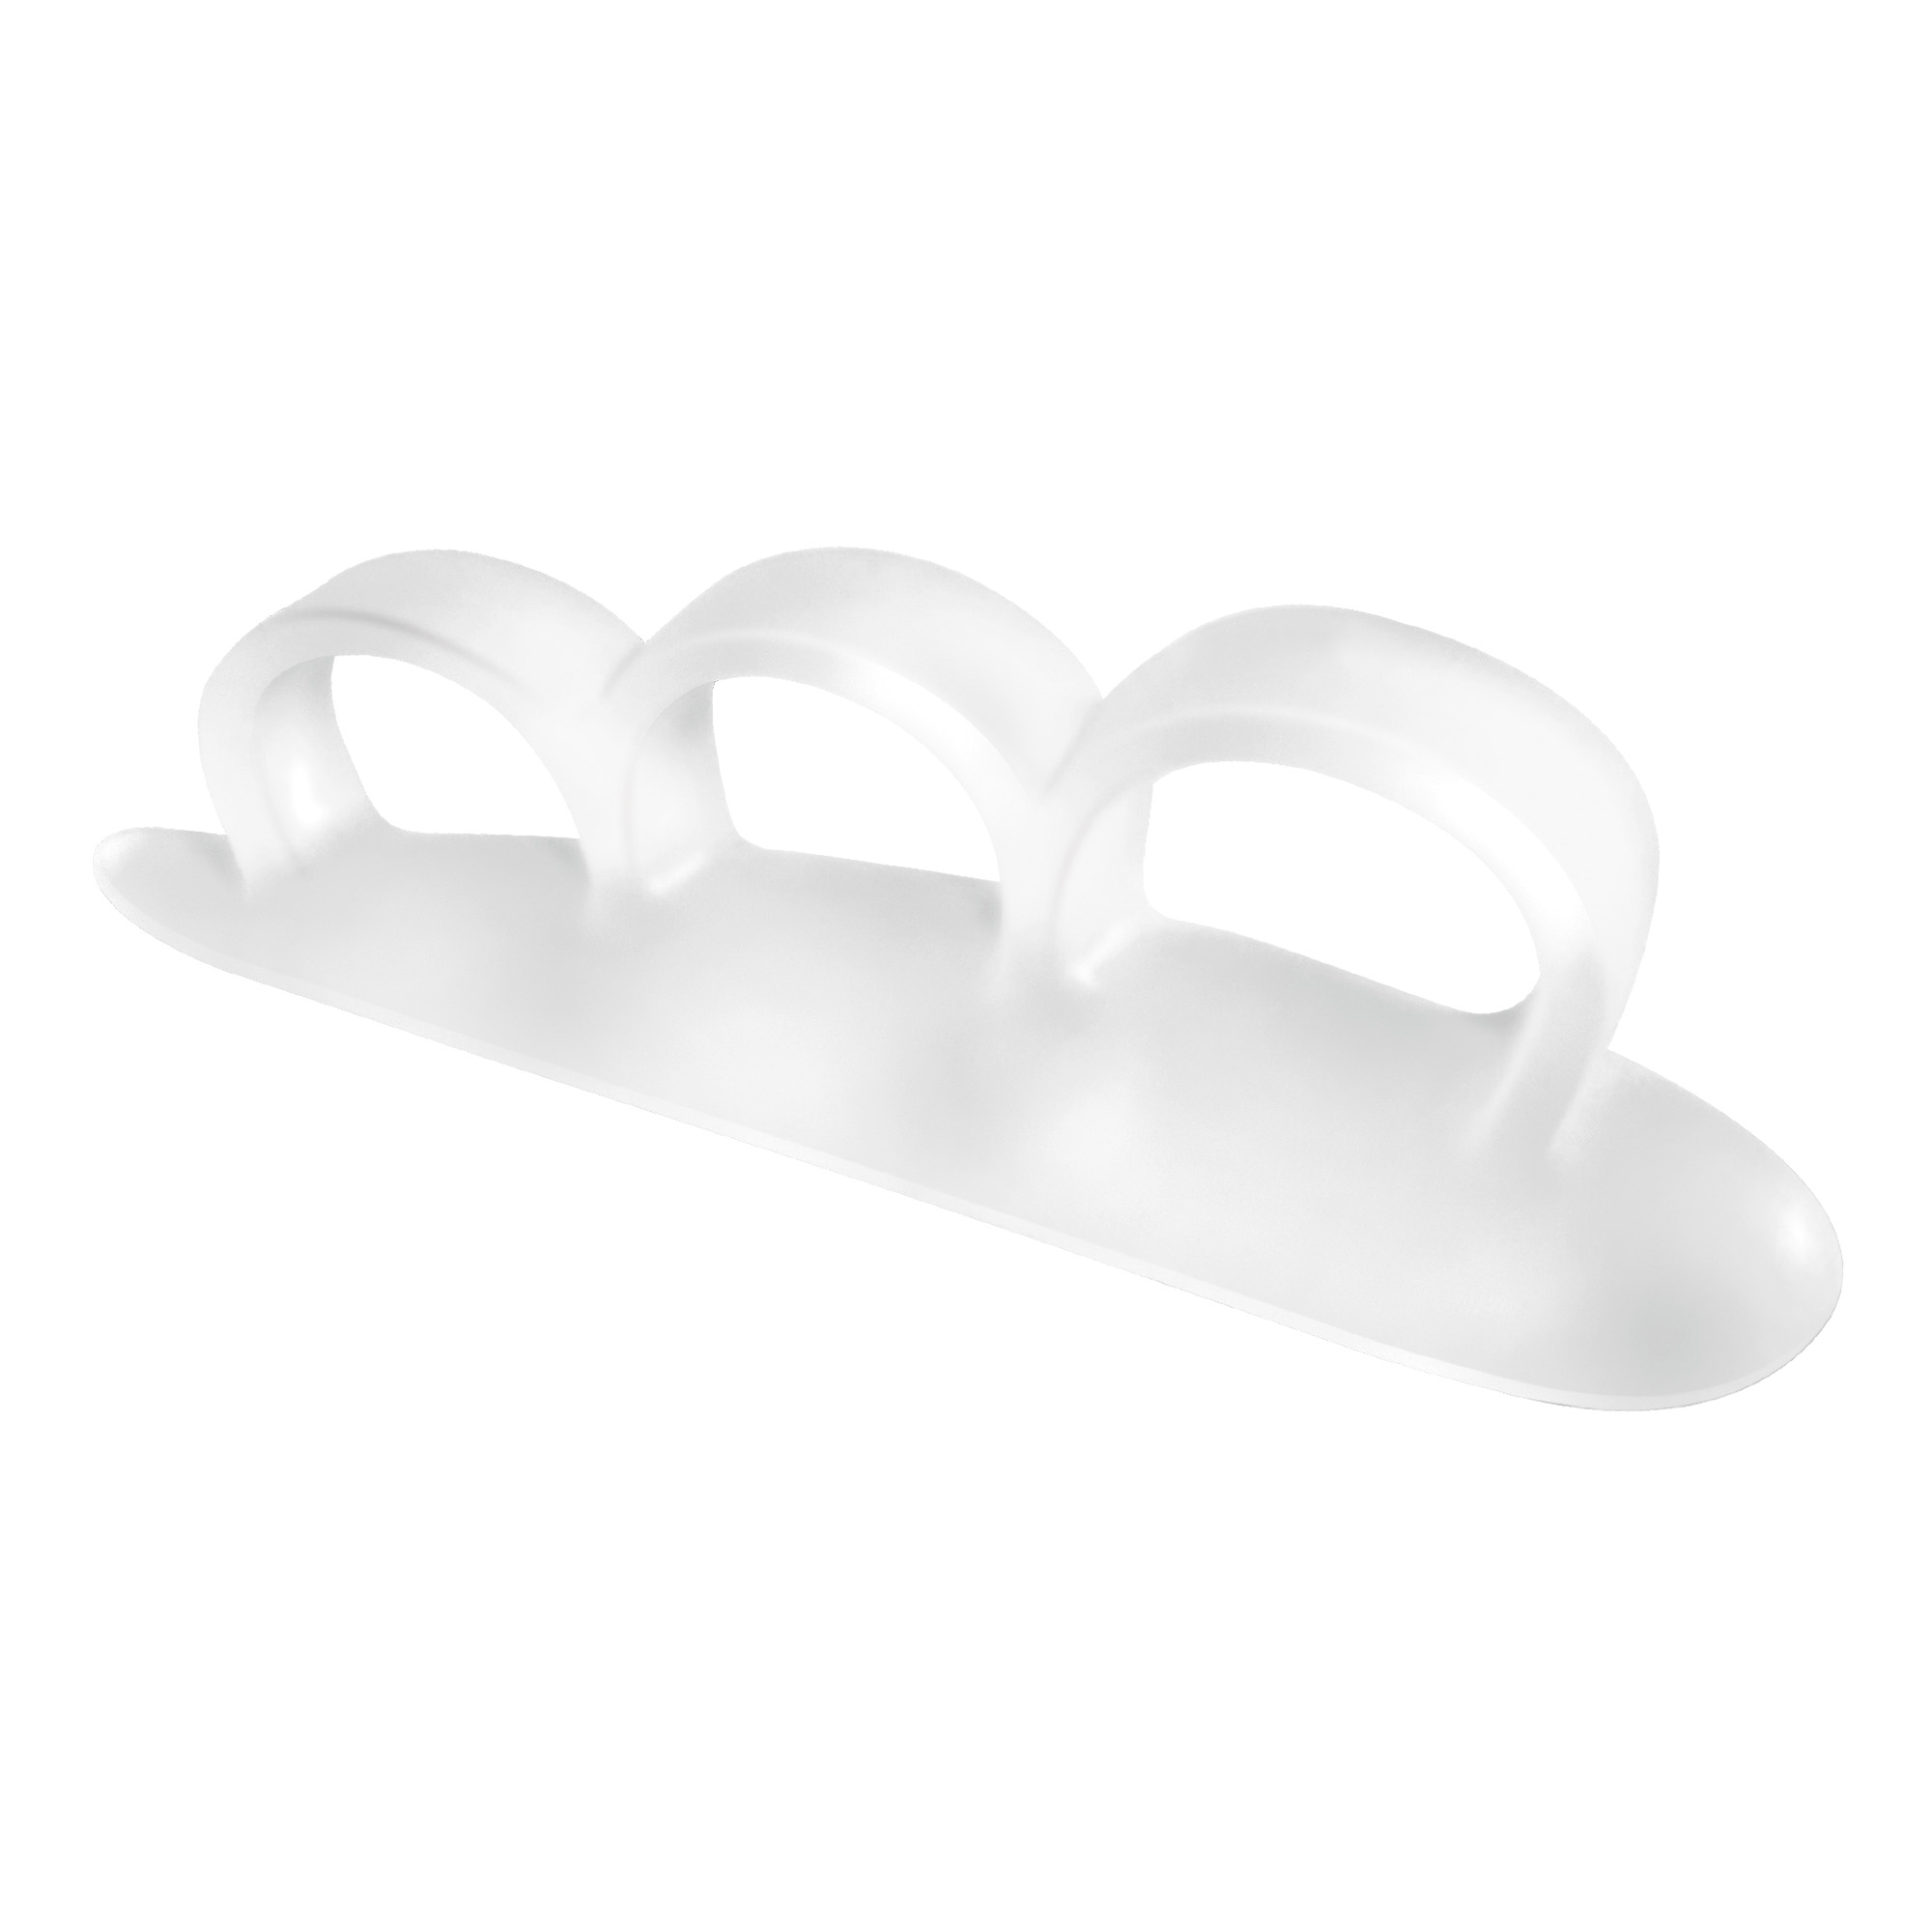 Gel cushion with toe rings - size Small for right foot 1 pc